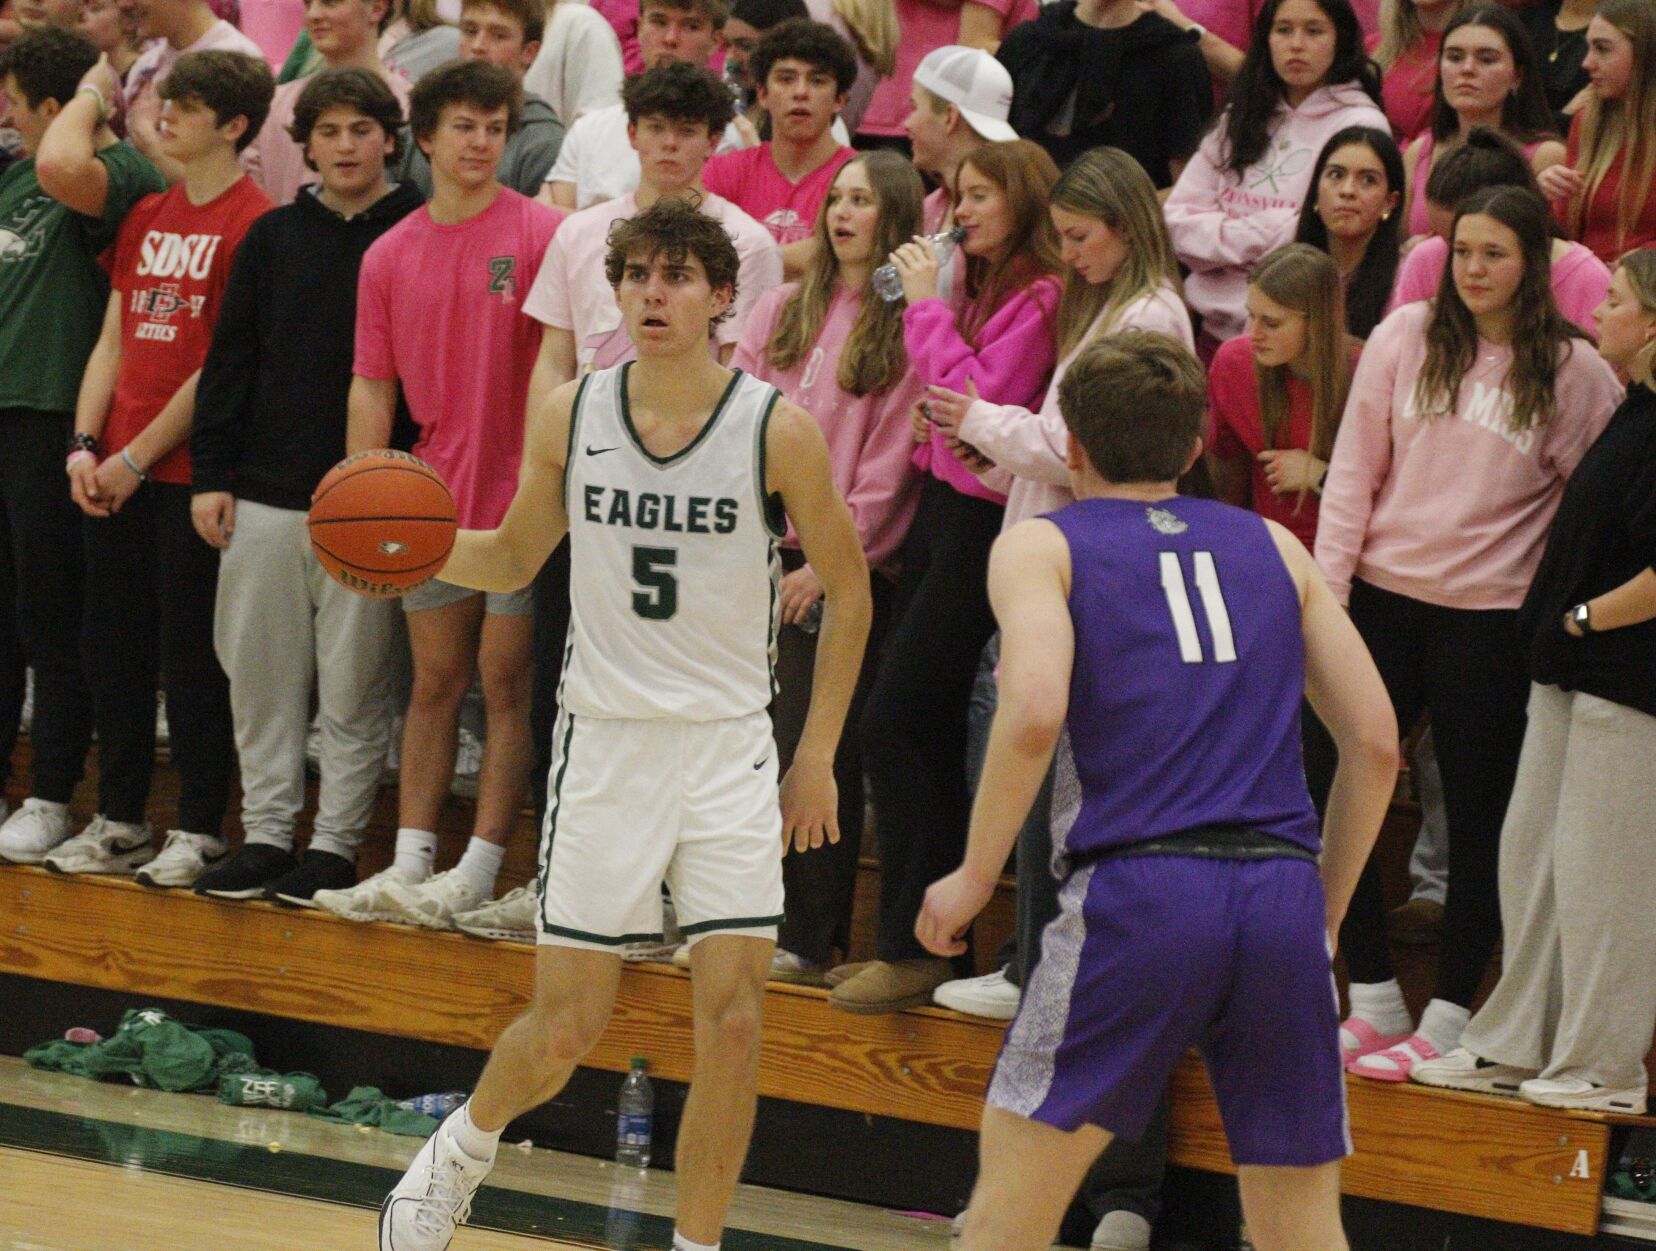 Zionsville Eagles’ Defensive Dominance Drives Win Over Brownsburg, 56-41